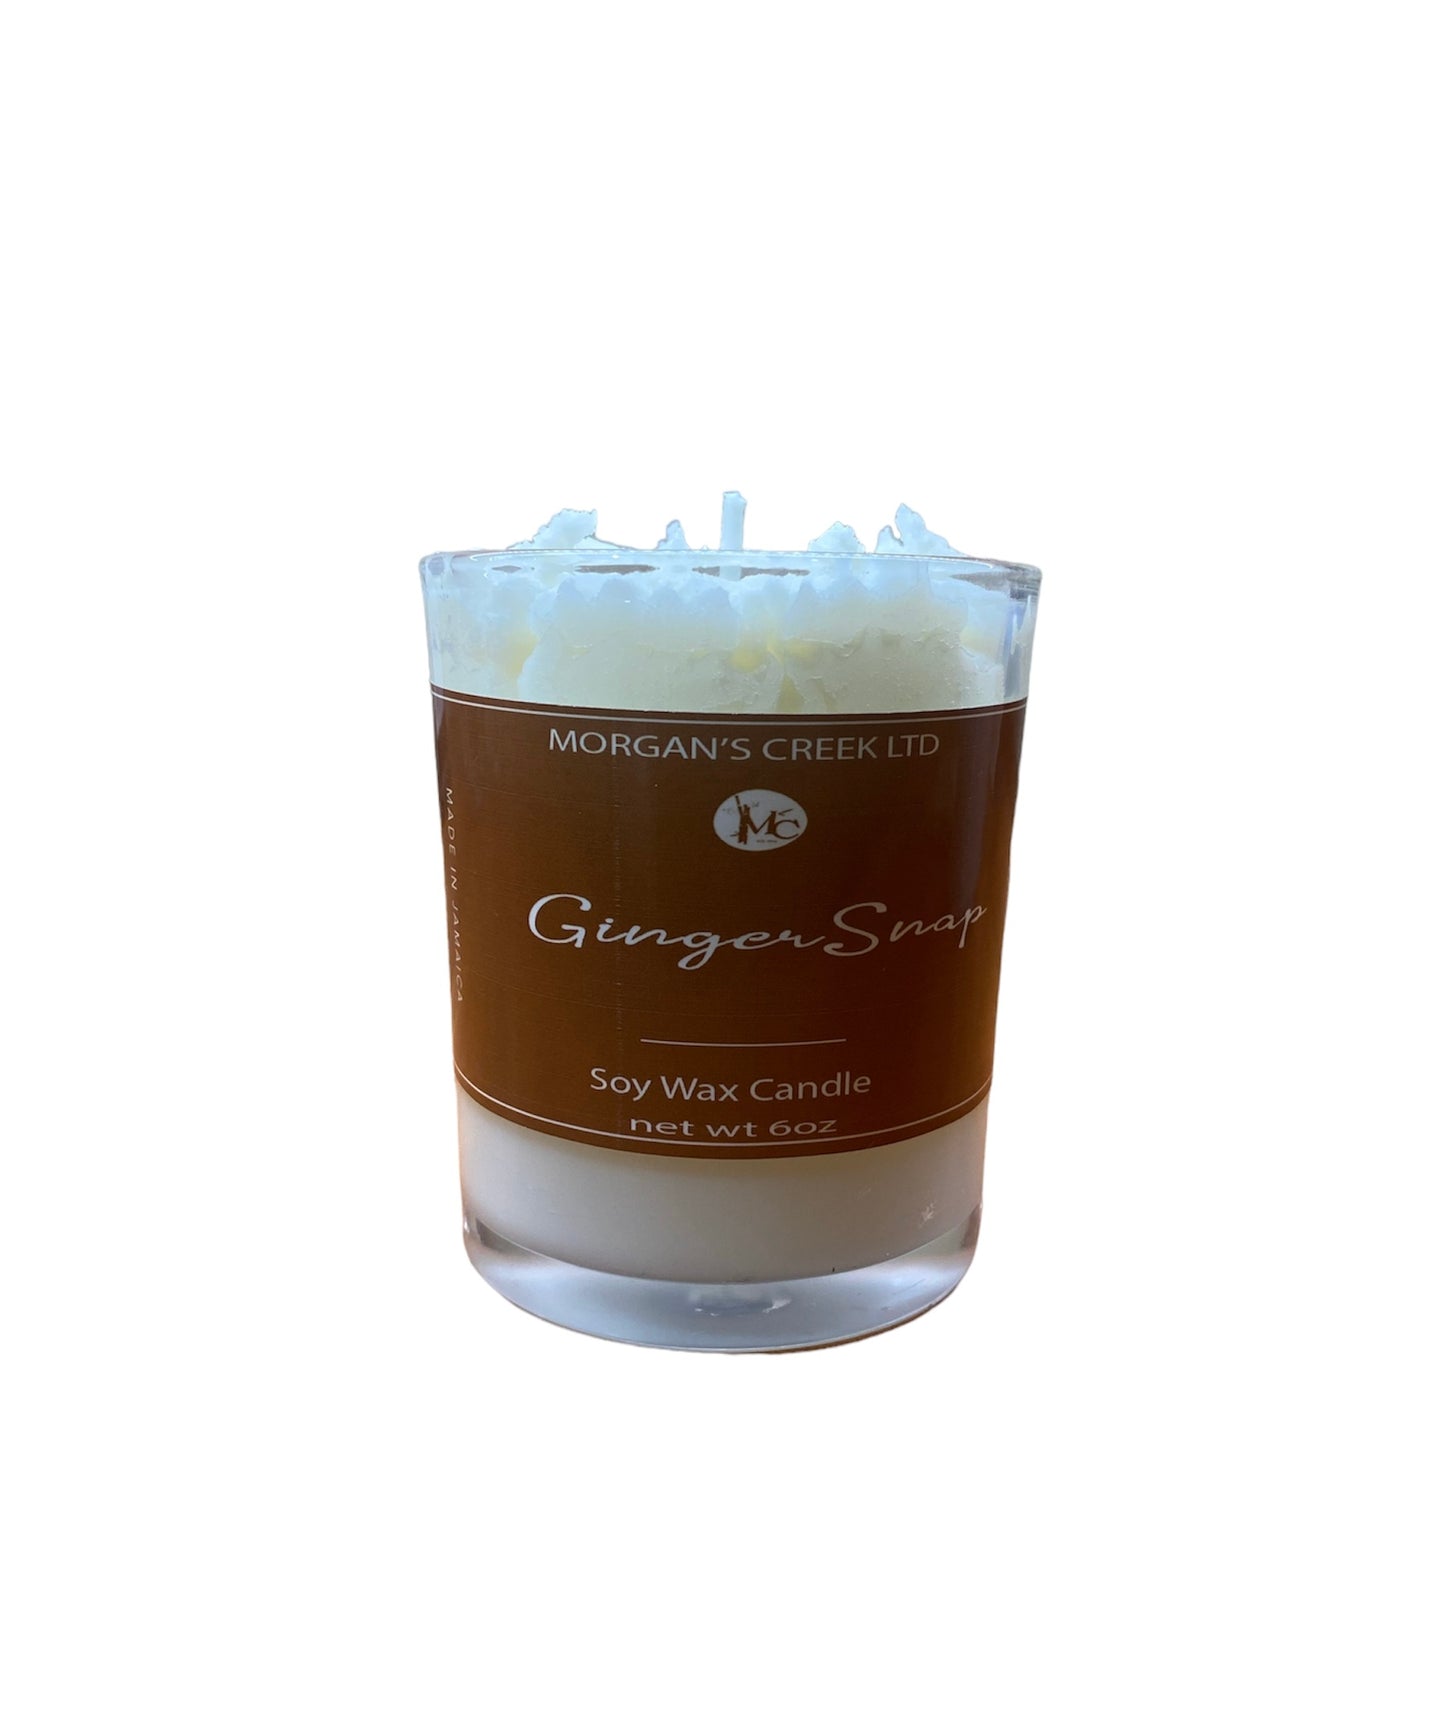 Gingersnap soy wax candle